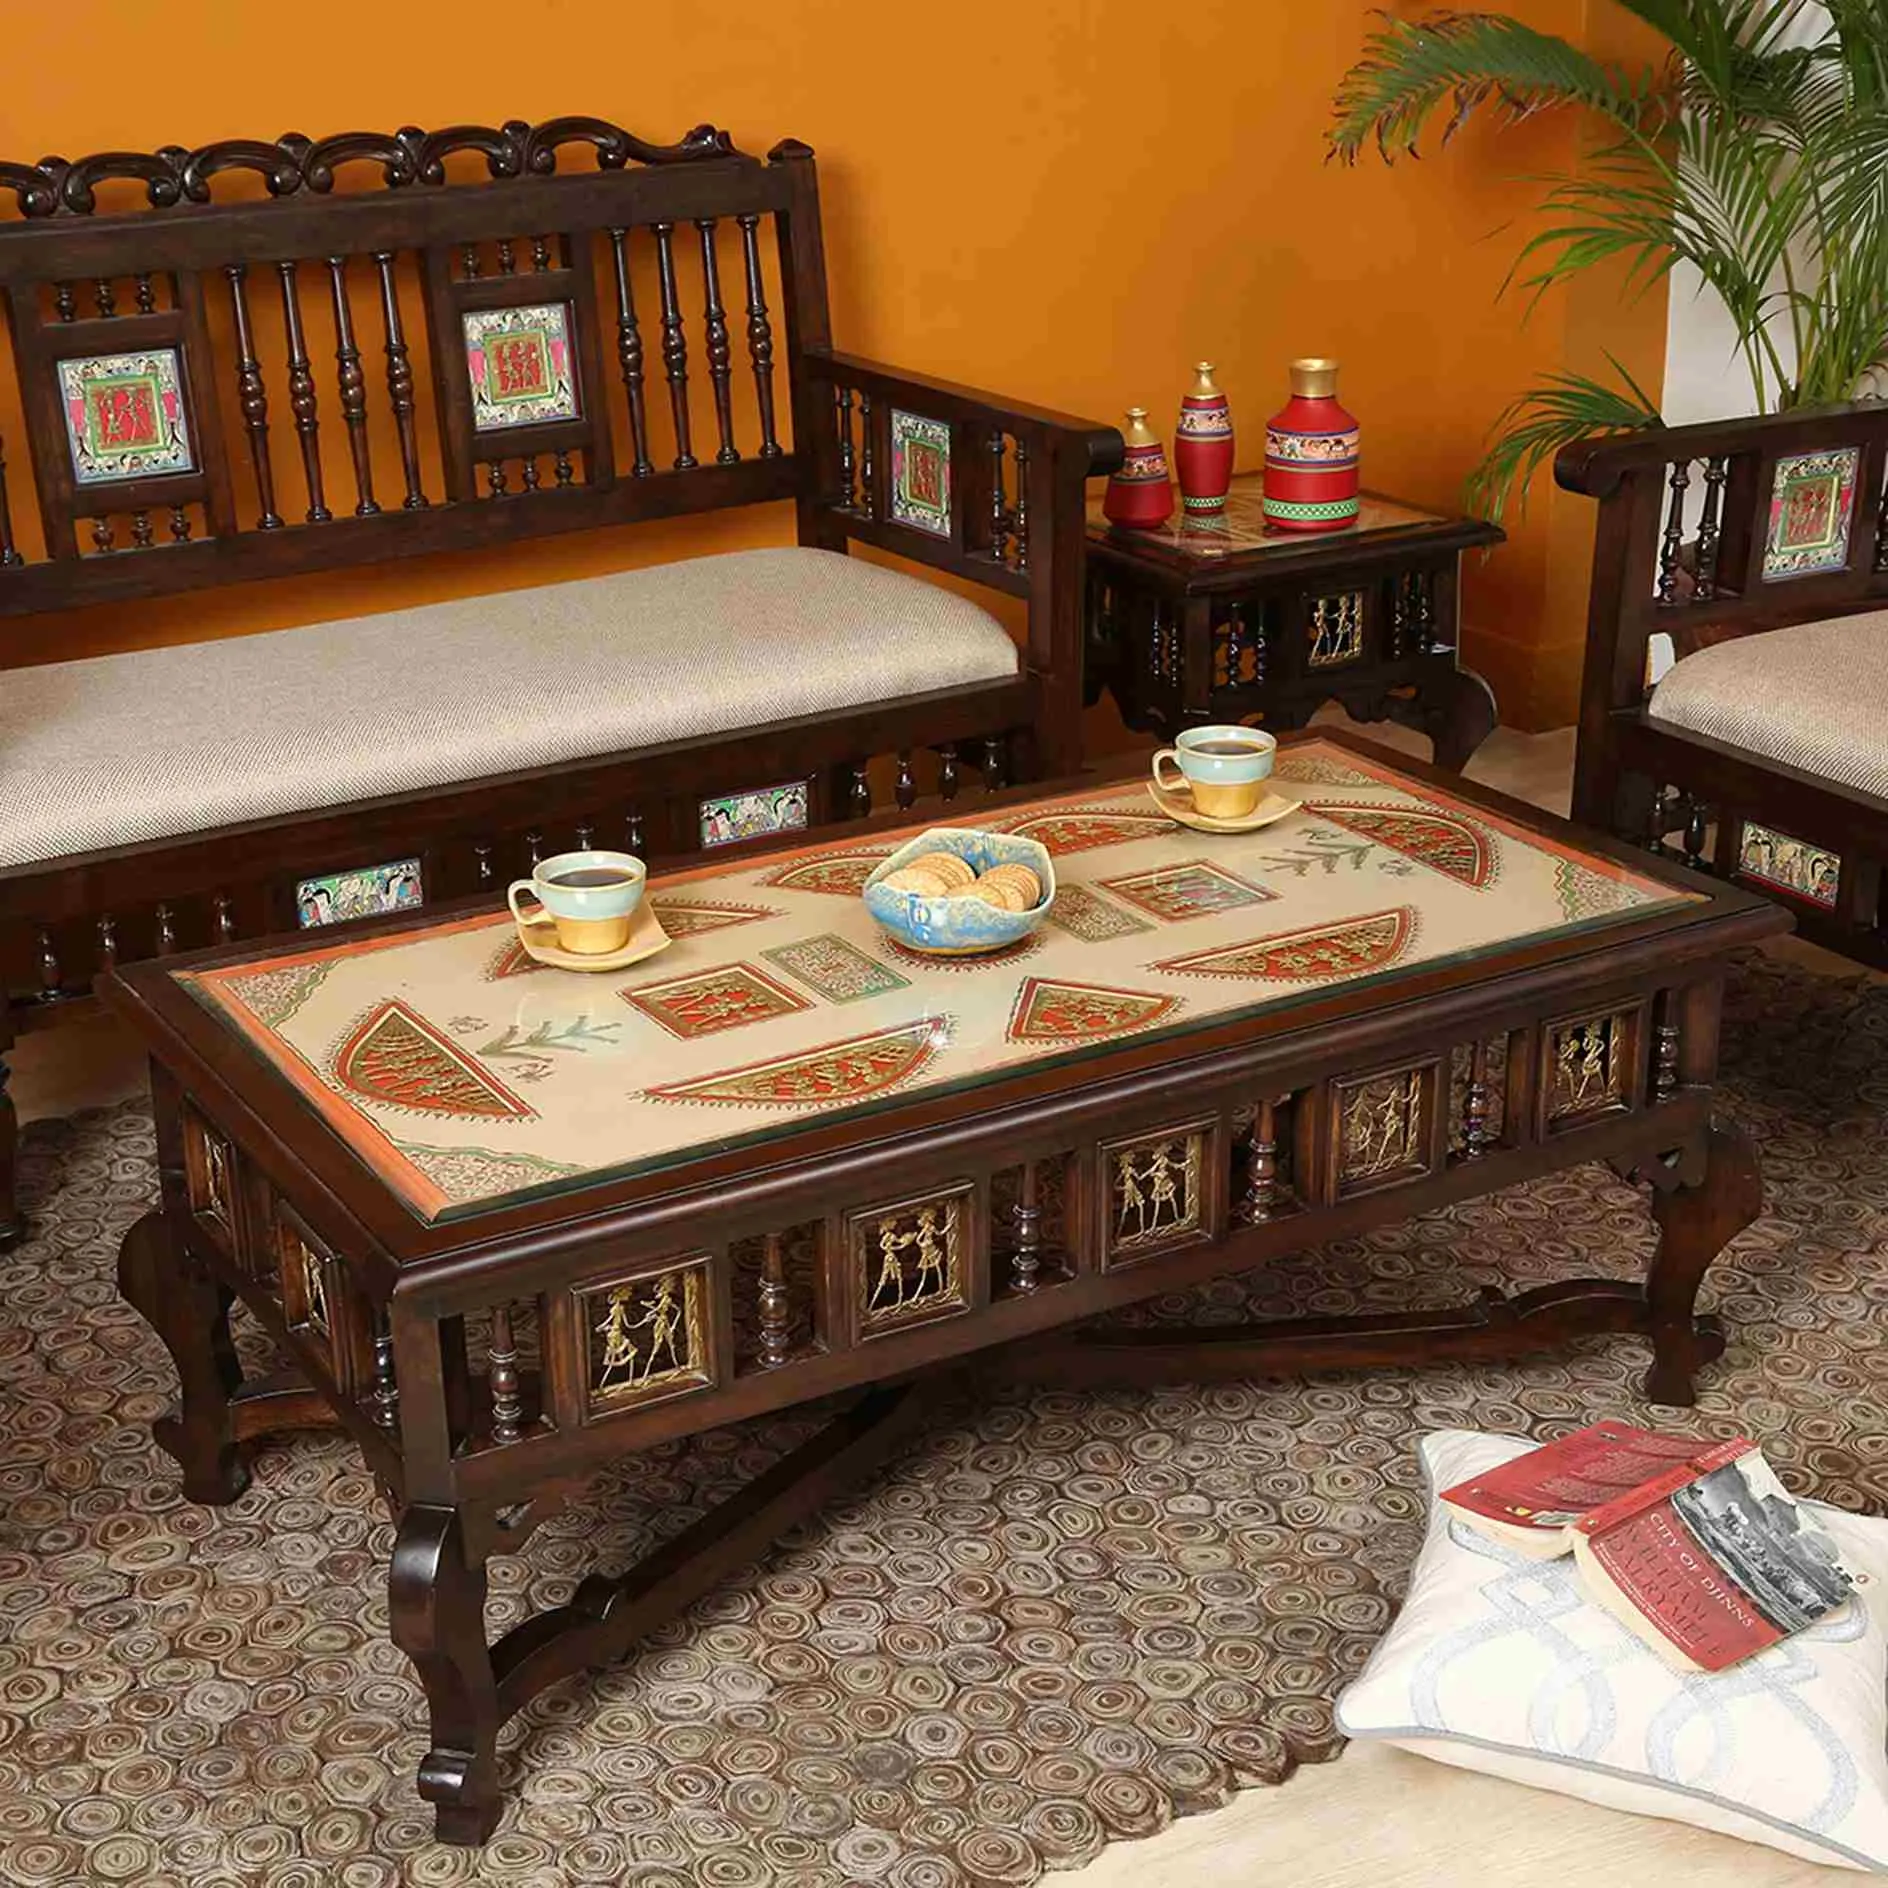 Classsic wooden centre table with patterns